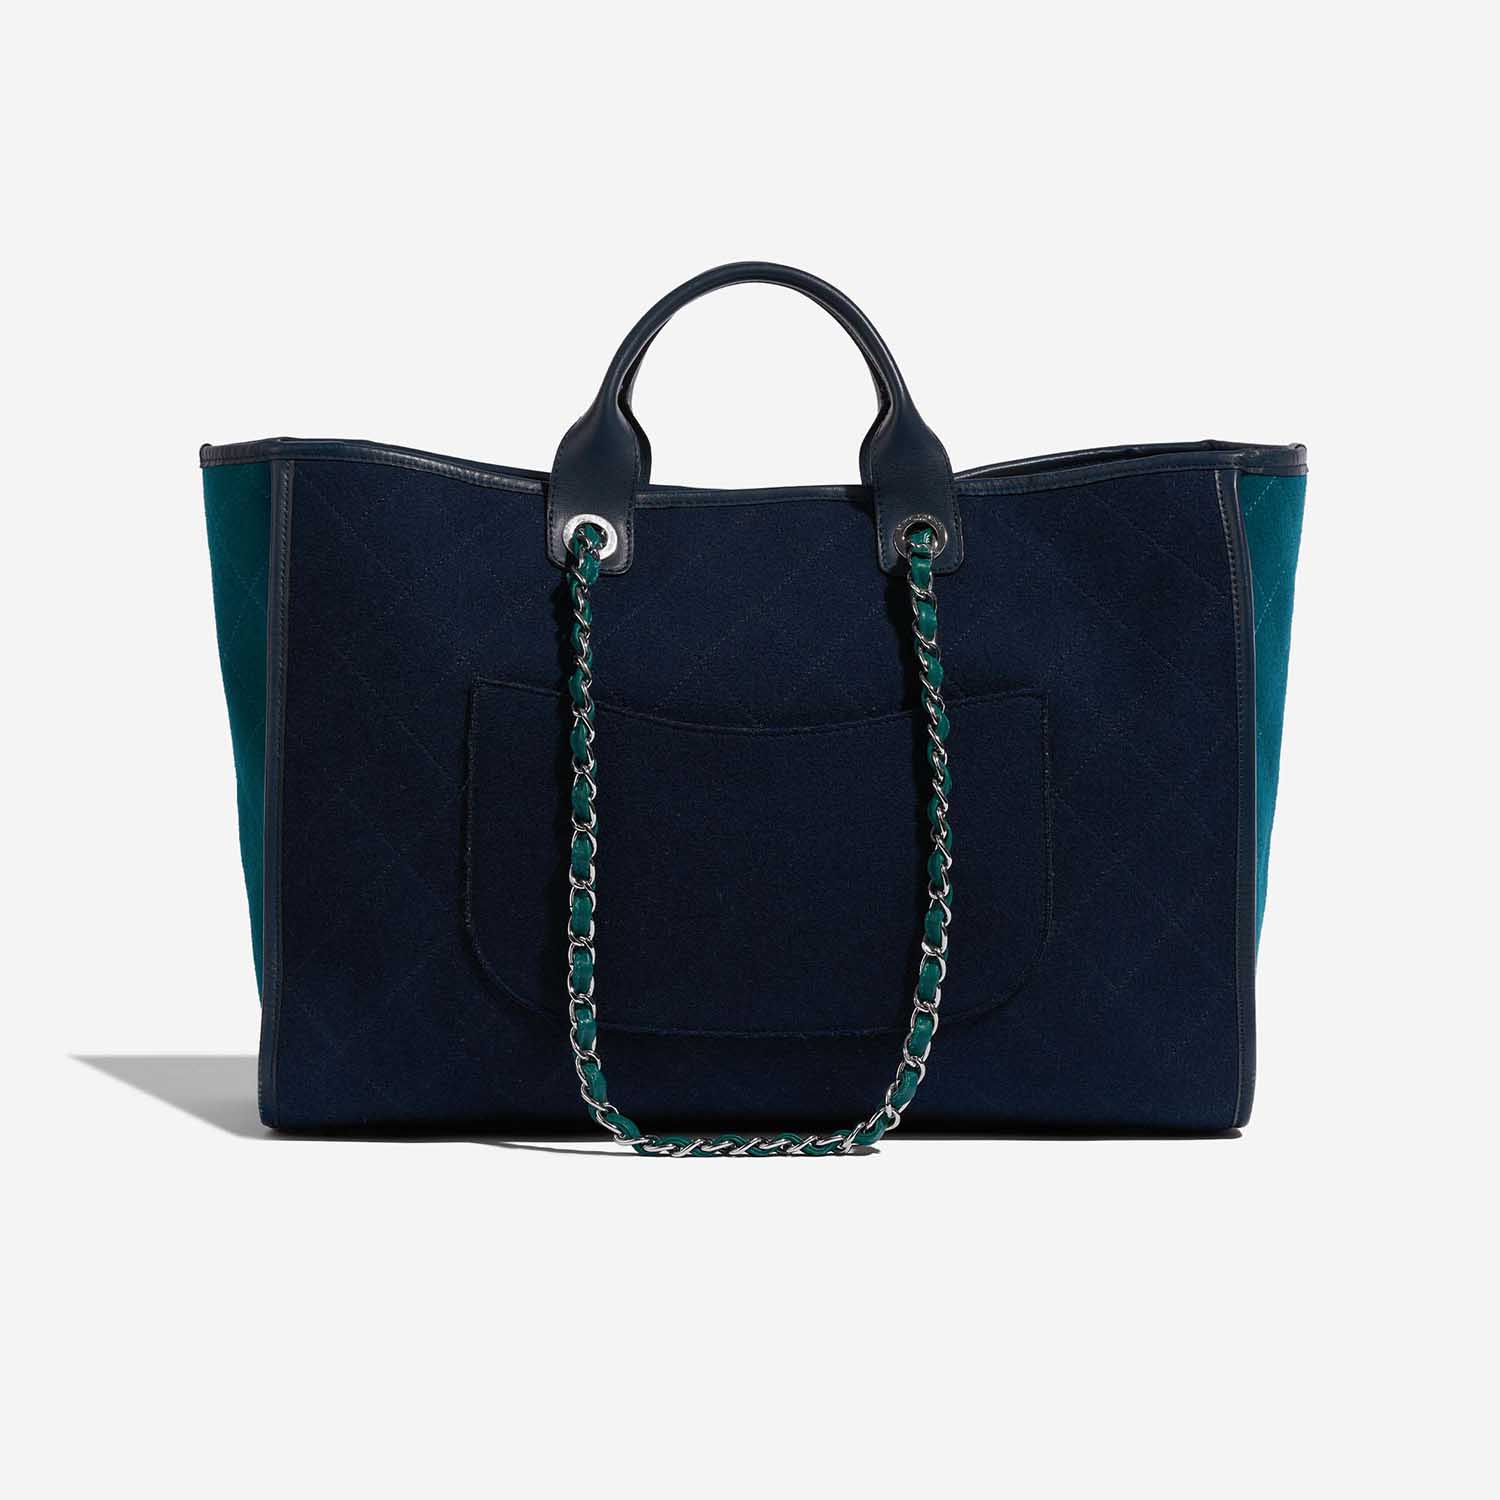 Pre-owned Chanel bag Deauville Large Wool Blue / Turquoise Blue Back | Sell your designer bag on Saclab.com